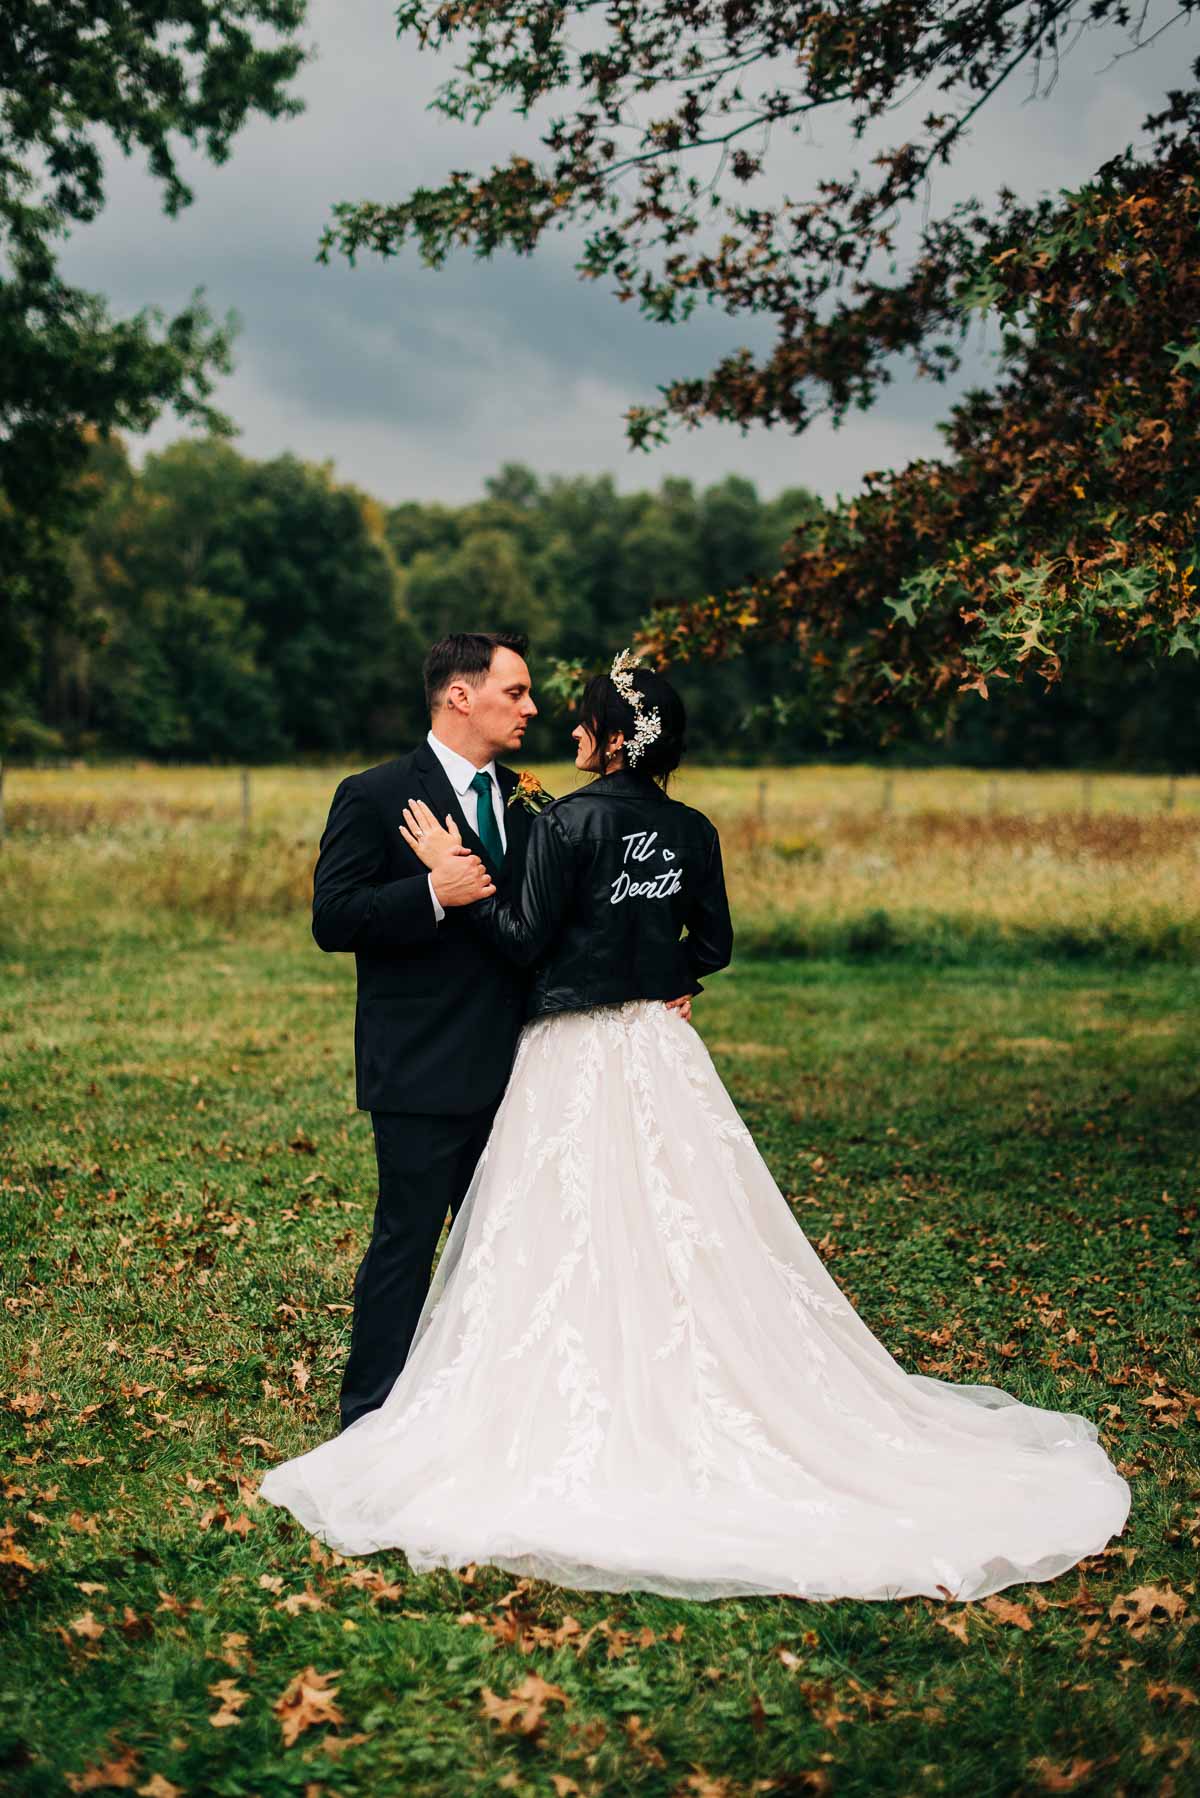 Bride and groom pose for portraits with fall foliage in the background